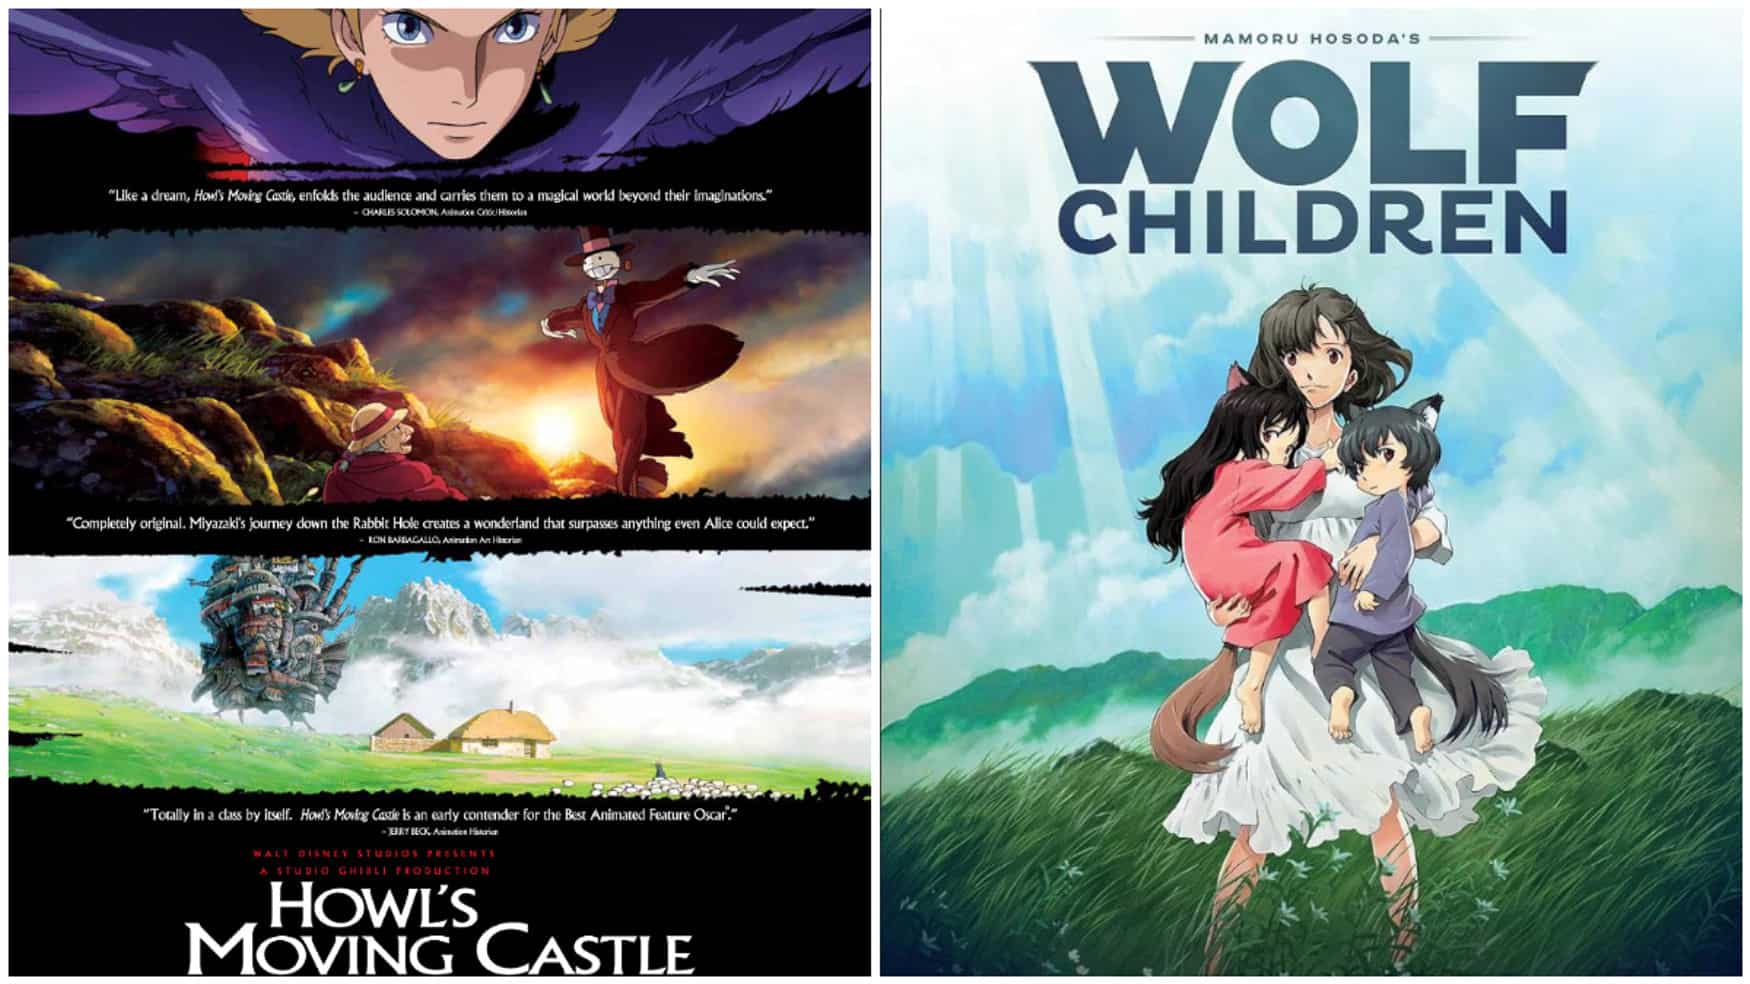 https://www.mobilemasala.com/movies/Best-Japanese-animation-movies-to-binge-watch-now-i265289